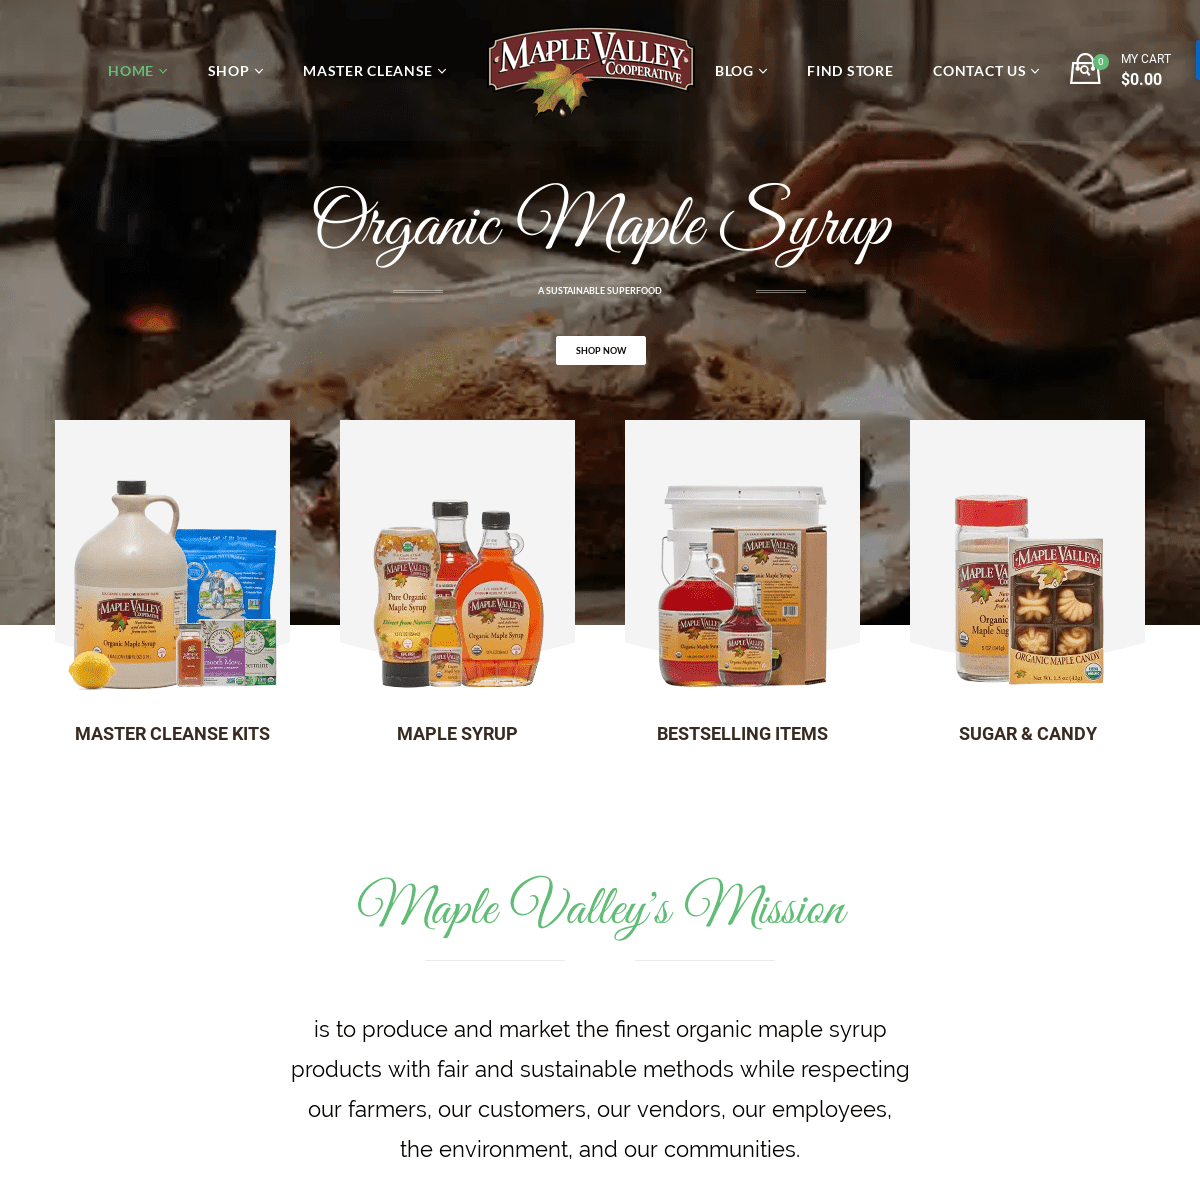 Maple Valley Cooperative | Pure Organic Maple Syrup | Highest Quality Maple Syrup